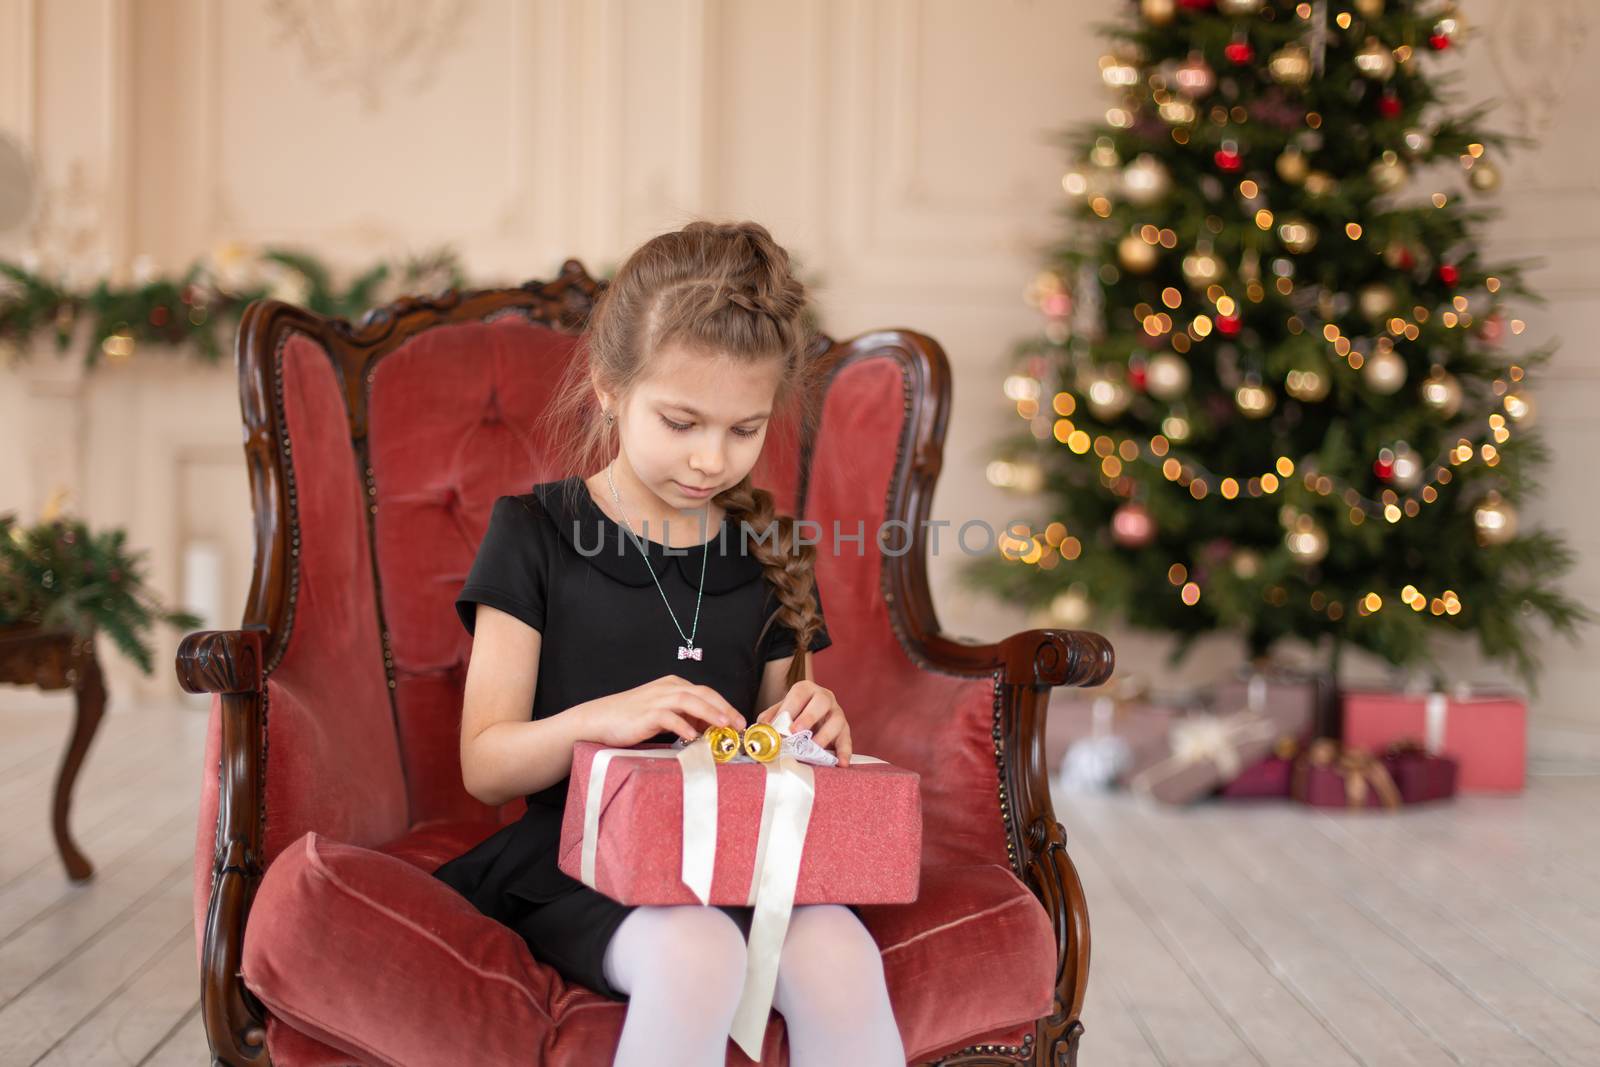 A little girl opens a Christmas present from Santa. Christmas tale. Happy childhood.